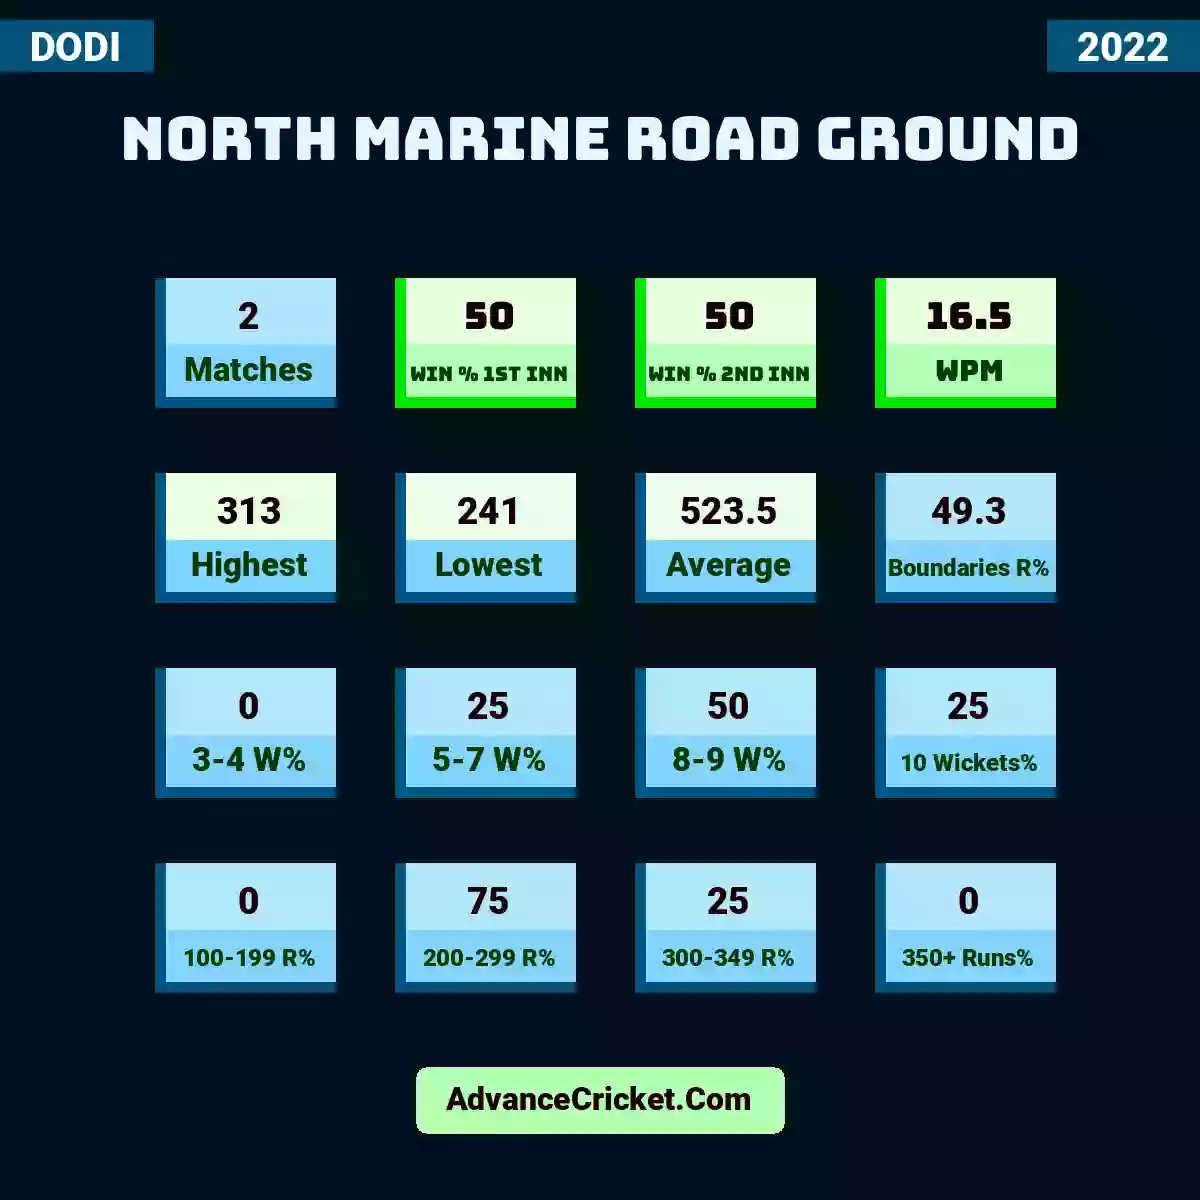 Image showing North Marine Road Ground with Matches: 2, Win % 1st Inn: 50, Win % 2nd Inn: 50, WPM: 16.5, Highest: 313, Lowest: 241, Average: 523.5, Boundaries R%: 49.3, 3-4 W%: 0, 5-7 W%: 25, 8-9 W%: 50, 10 Wickets%: 25, 100-199 R%: 0, 200-299 R%: 75, 300-349 R%: 25, 350+ Runs%: 0.